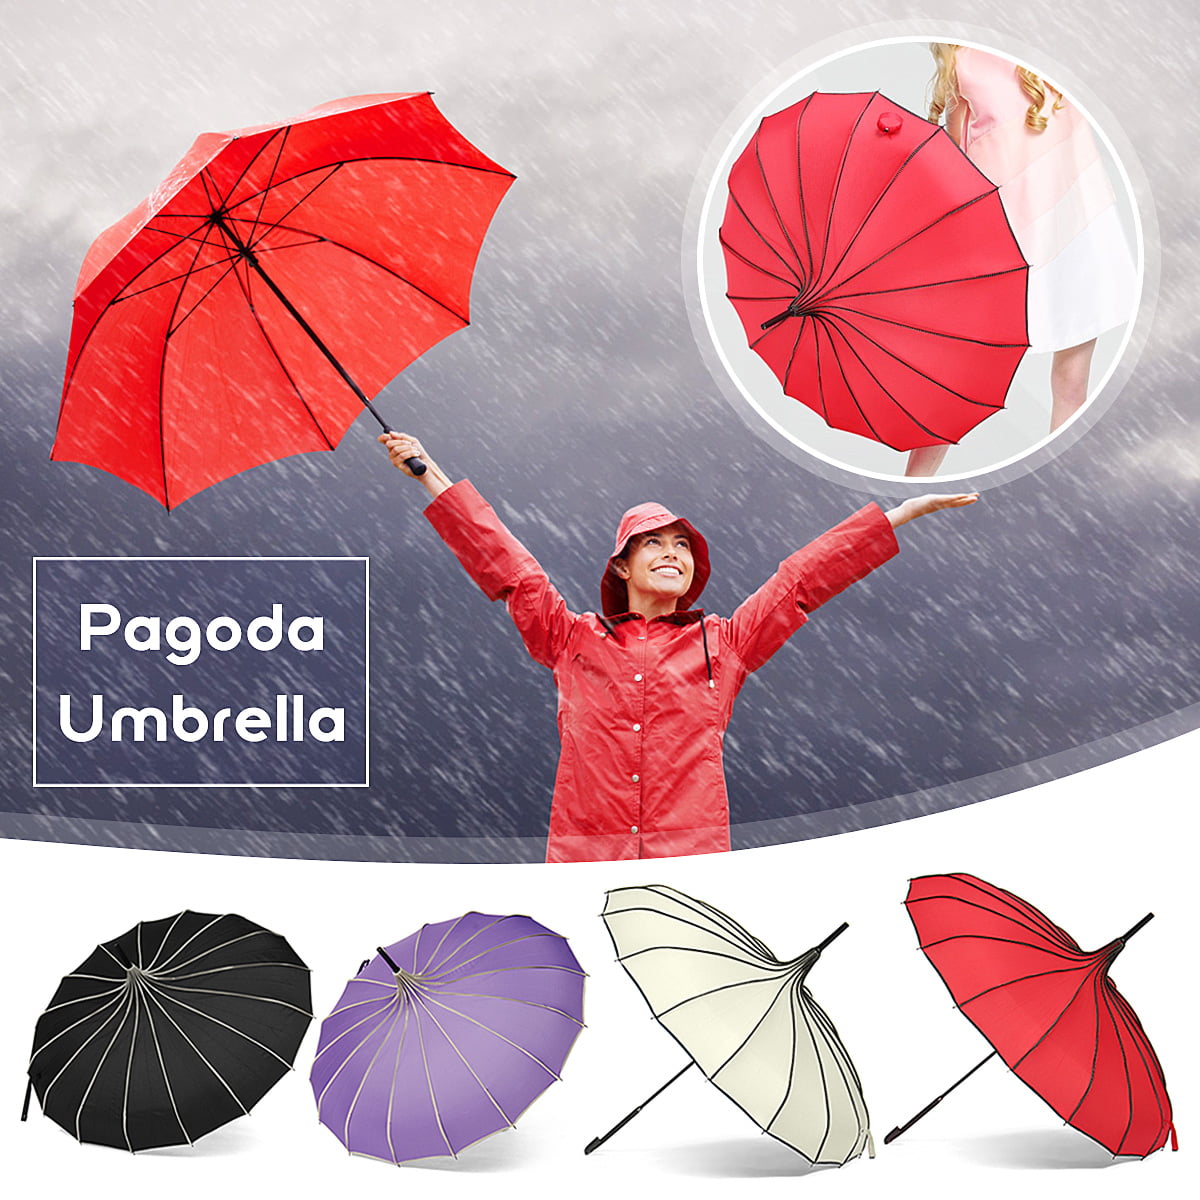 Light Year Antique Parasol Style Umbrella 190T Waterproof Fabric Cloth Carry Strap Collapsible Foldable Wooden Handle Windproof Sun Protection UV 24 Rib Black 44 x 44 x 33